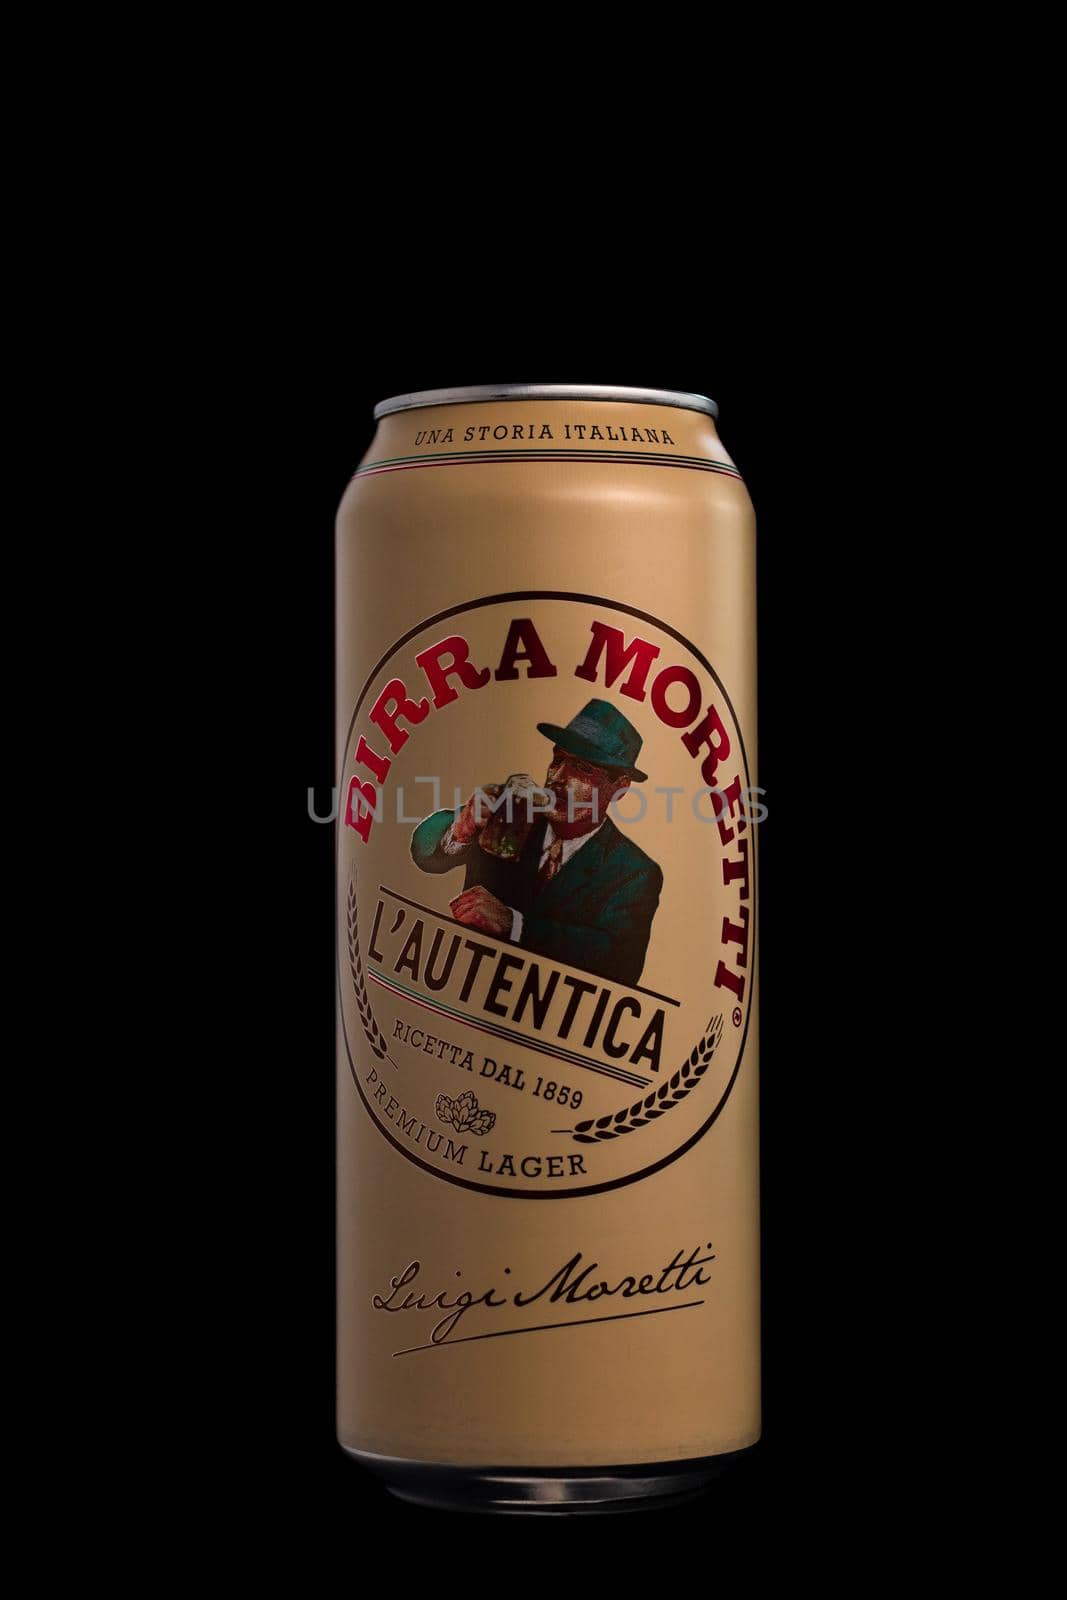 Birra Moretti, a premium lager beer produced by Italian brewing company now owned by Heineken International. Studio photo shoot in Bucharest, Romania, 2021 by vladispas